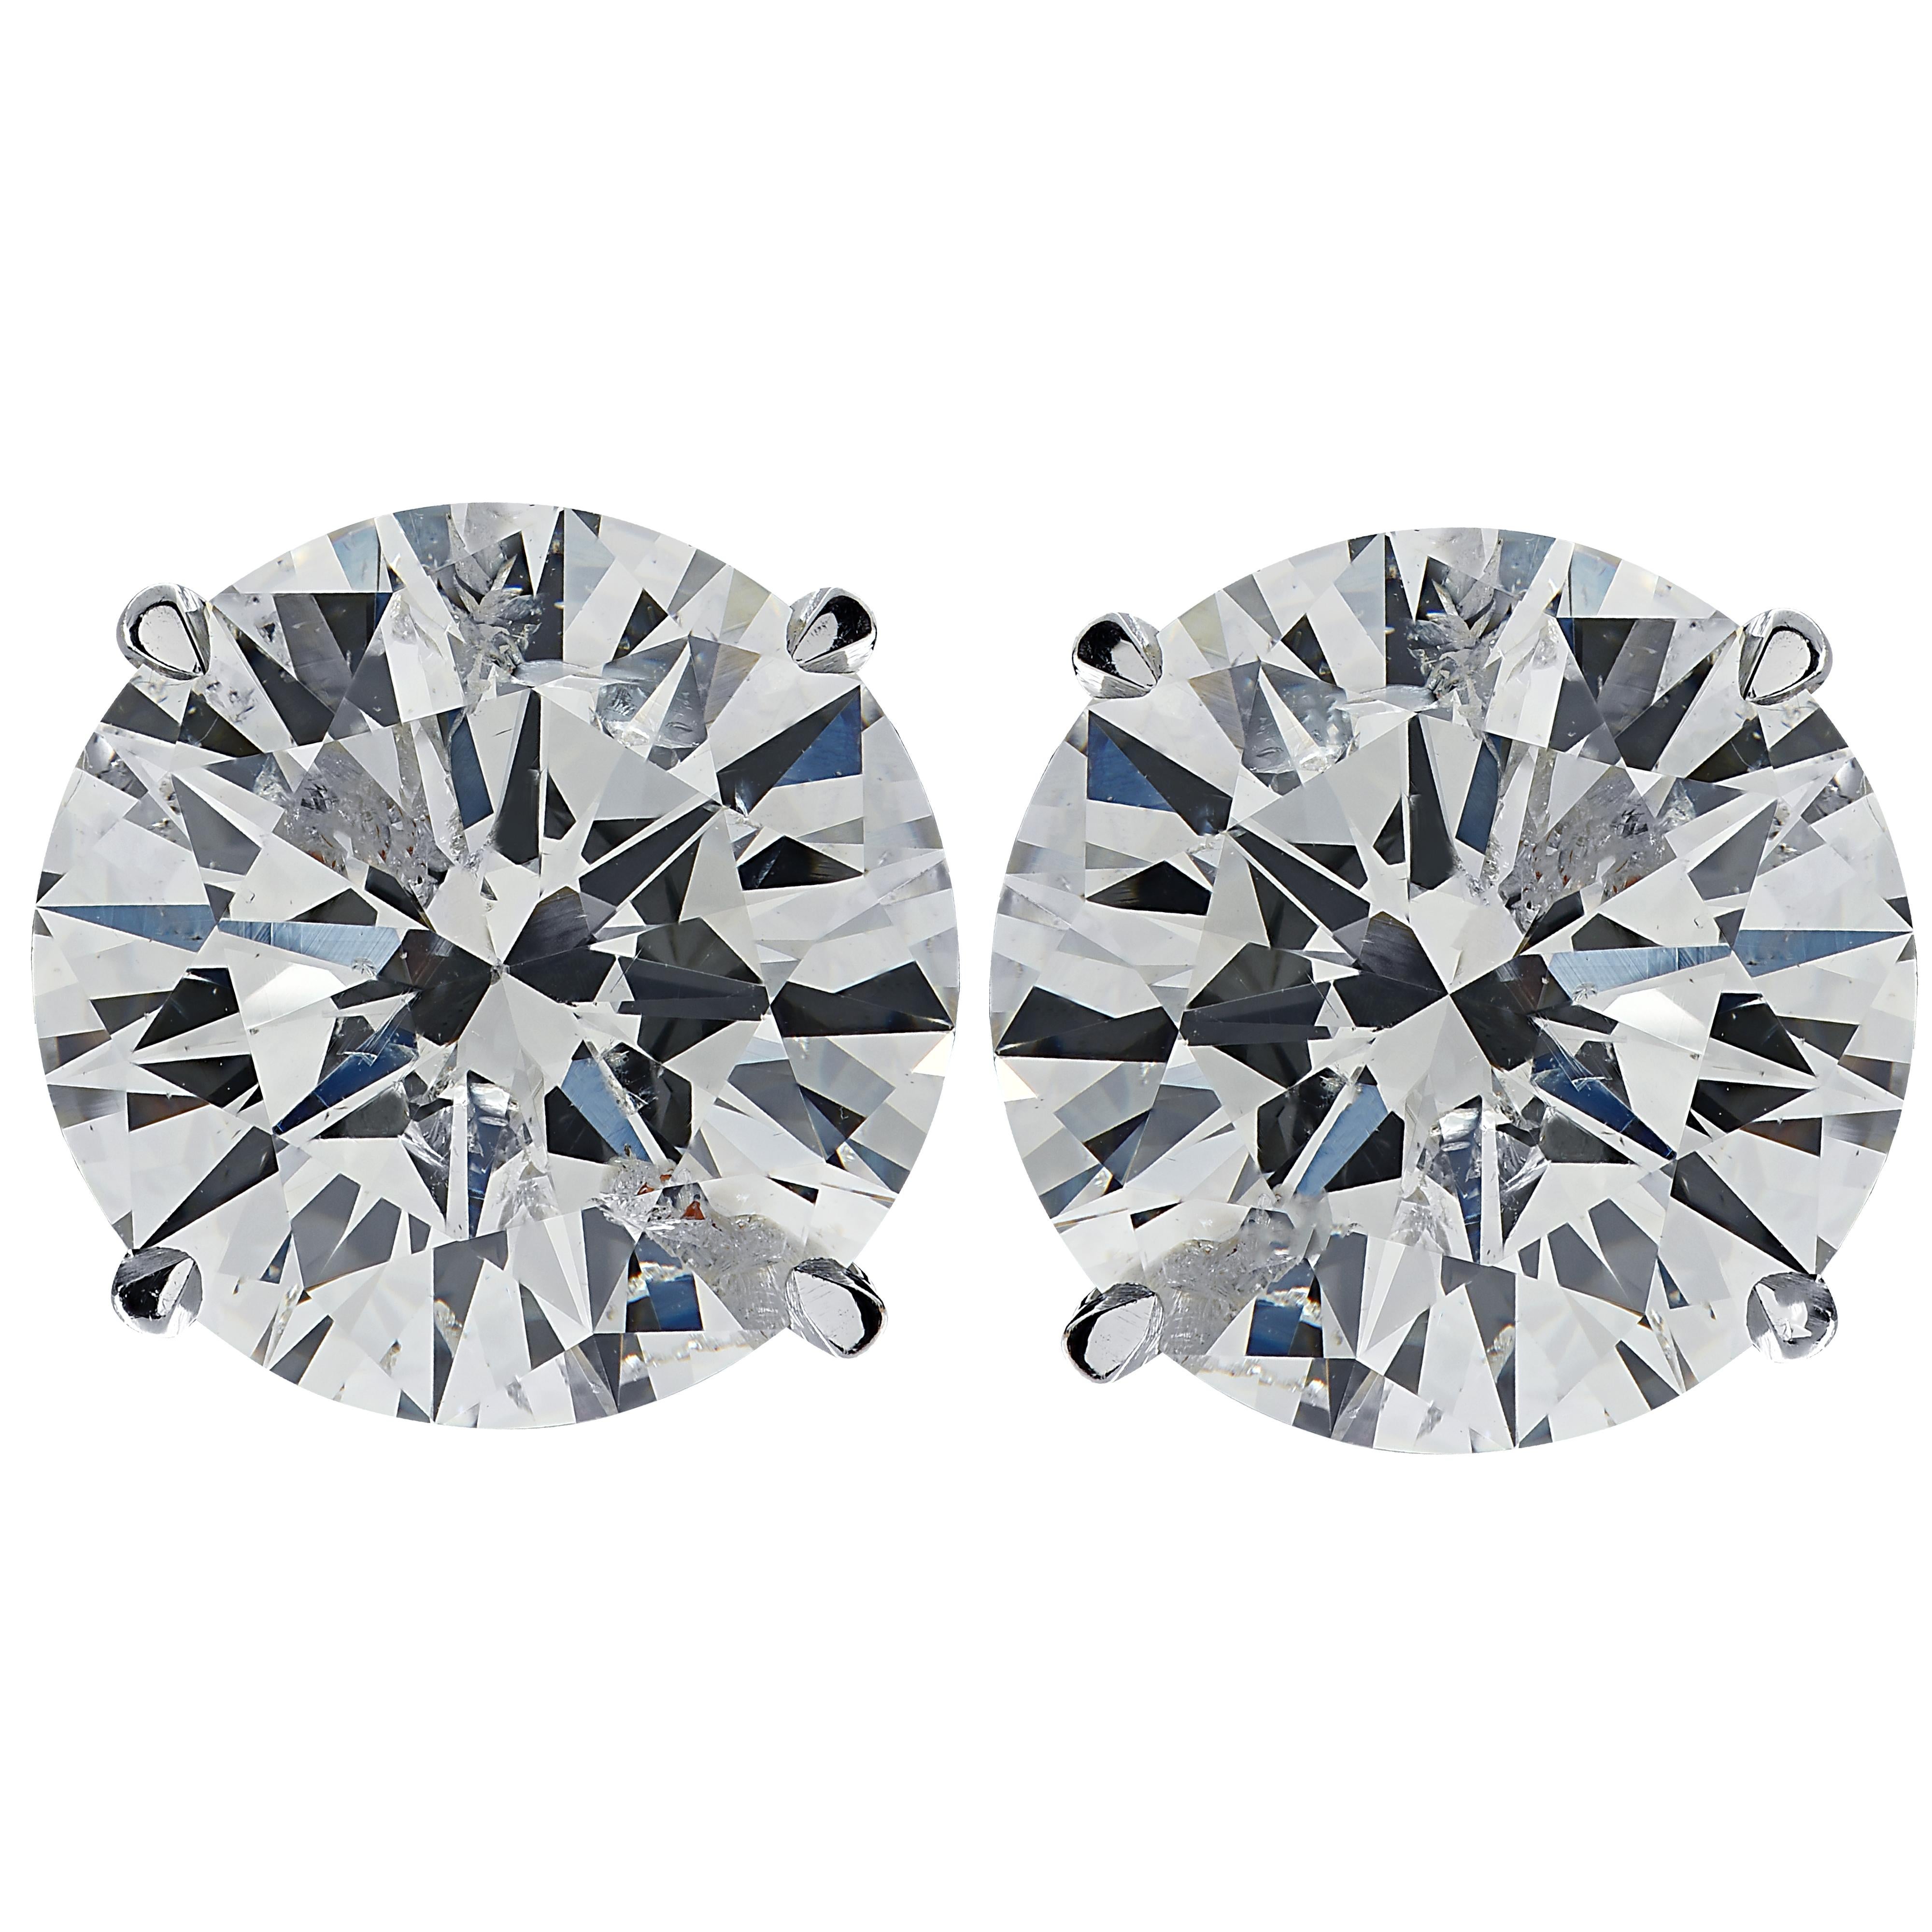 Stunning Vivid Diamonds solitaire stud earrings crafted in white gold, showcasing 2 round brilliant cut diamonds weighing 2.08 carats total, H-I color I1 clarity. These diamonds were carefully selected and perfectly matched to create these classic